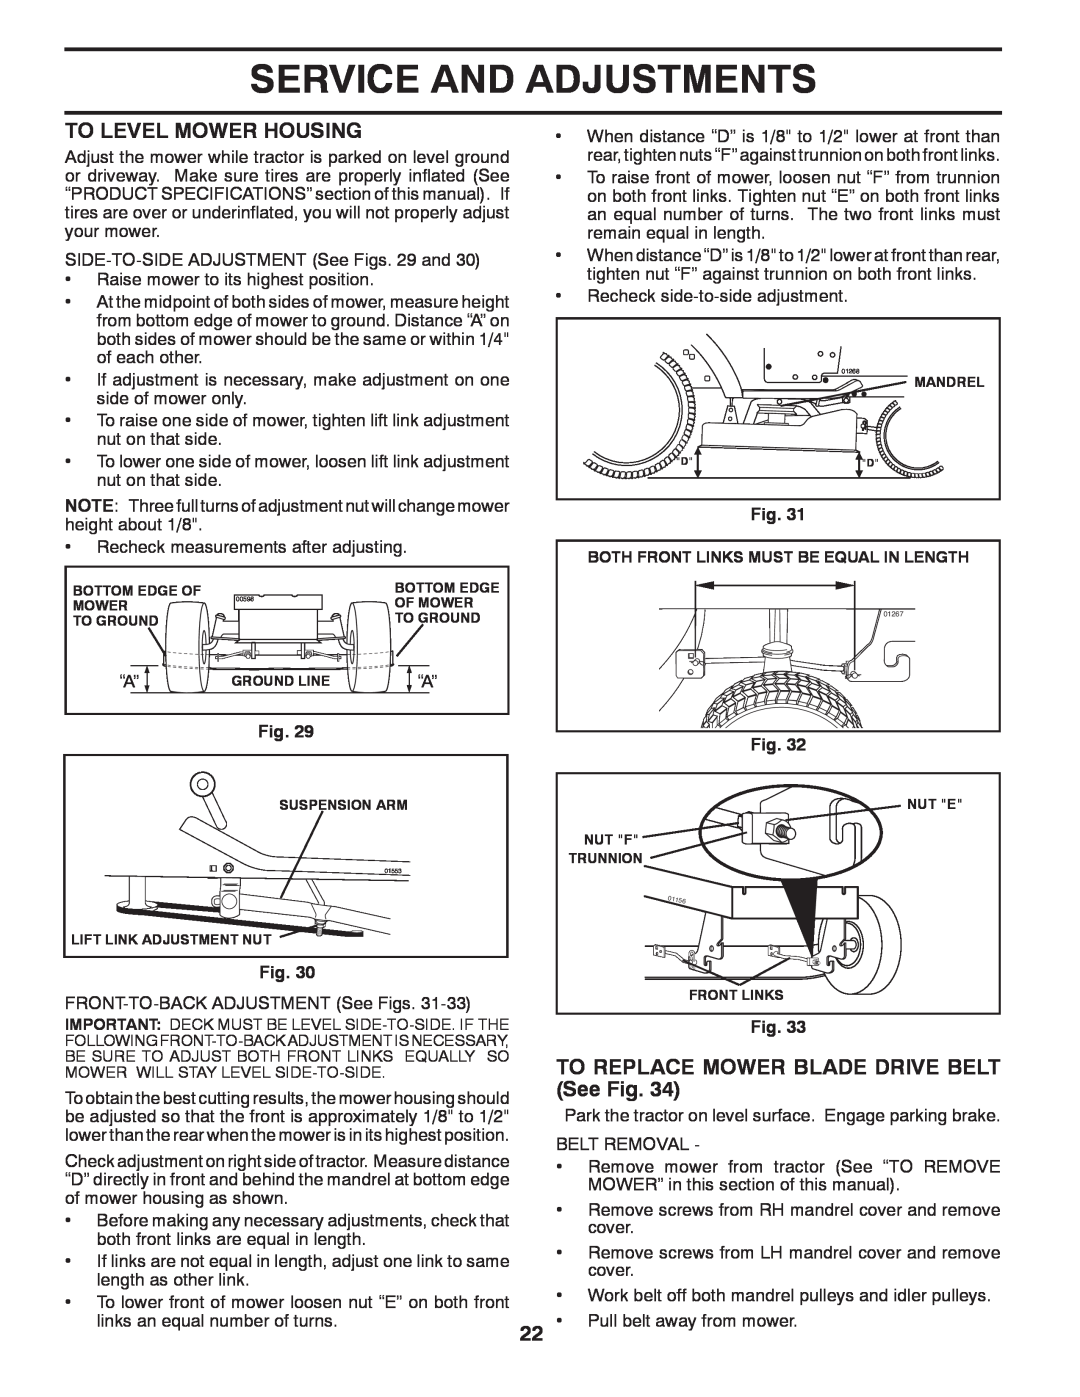 Husqvarna CTH2036T manual To Level Mower Housing, To Replace Mower Blade Drive Belt, See Fig, Service And Adjustments 